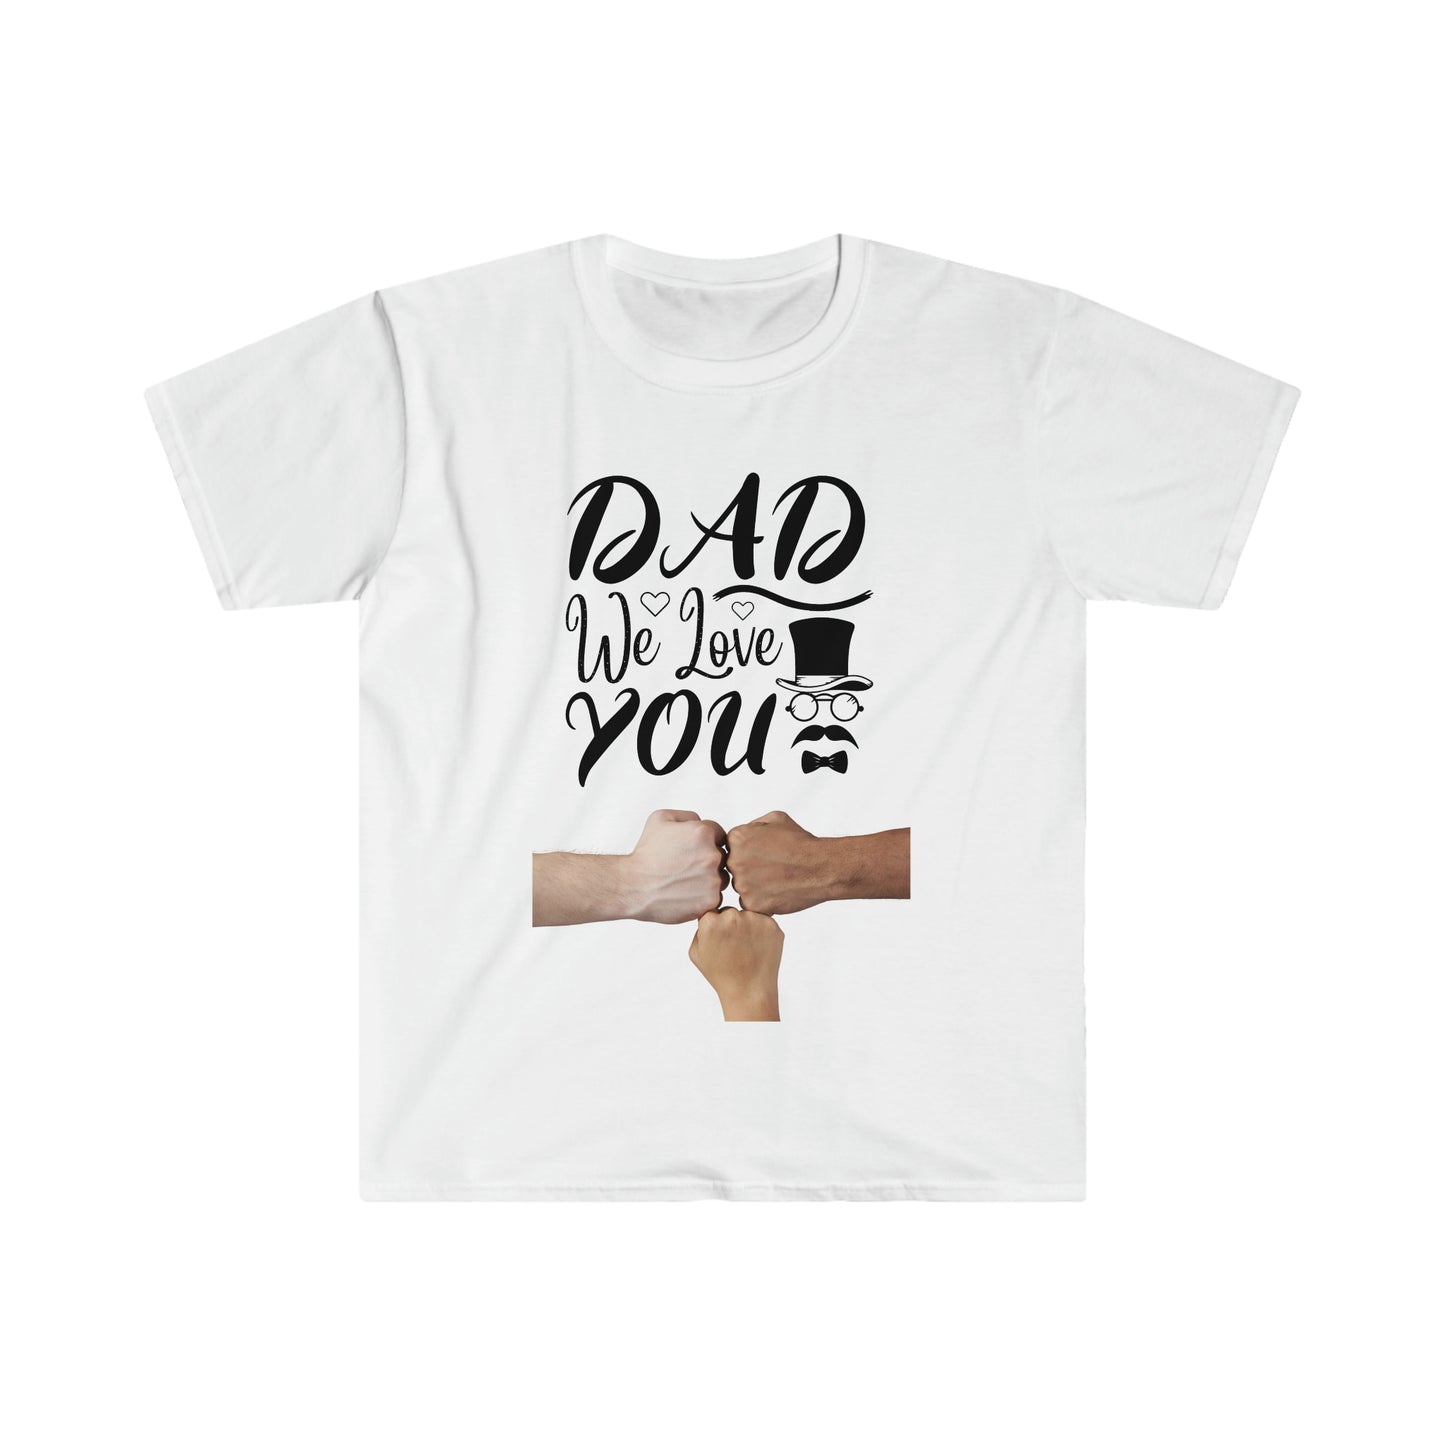 Unisex Softstyle T-Shirt, Unisex T-shirt, Funny Father's Day Gift, Dad Jokes, Funny Dad Shirt, Funny Shirt for Dad, Dad Birthday Gift, Dad Anniversary Gift